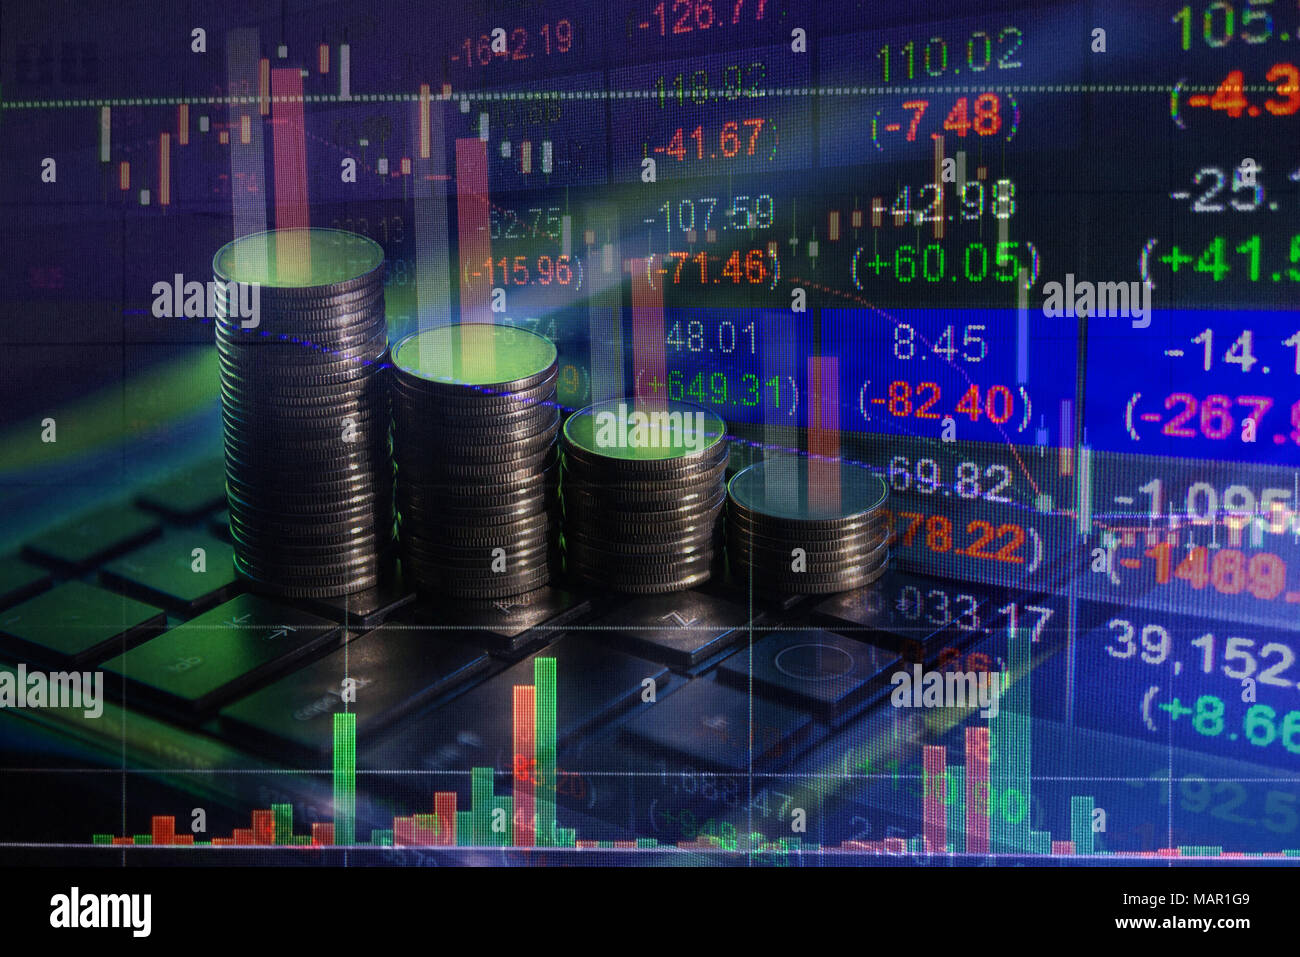 Financial stock market exchange, business report concept background Stock Photo